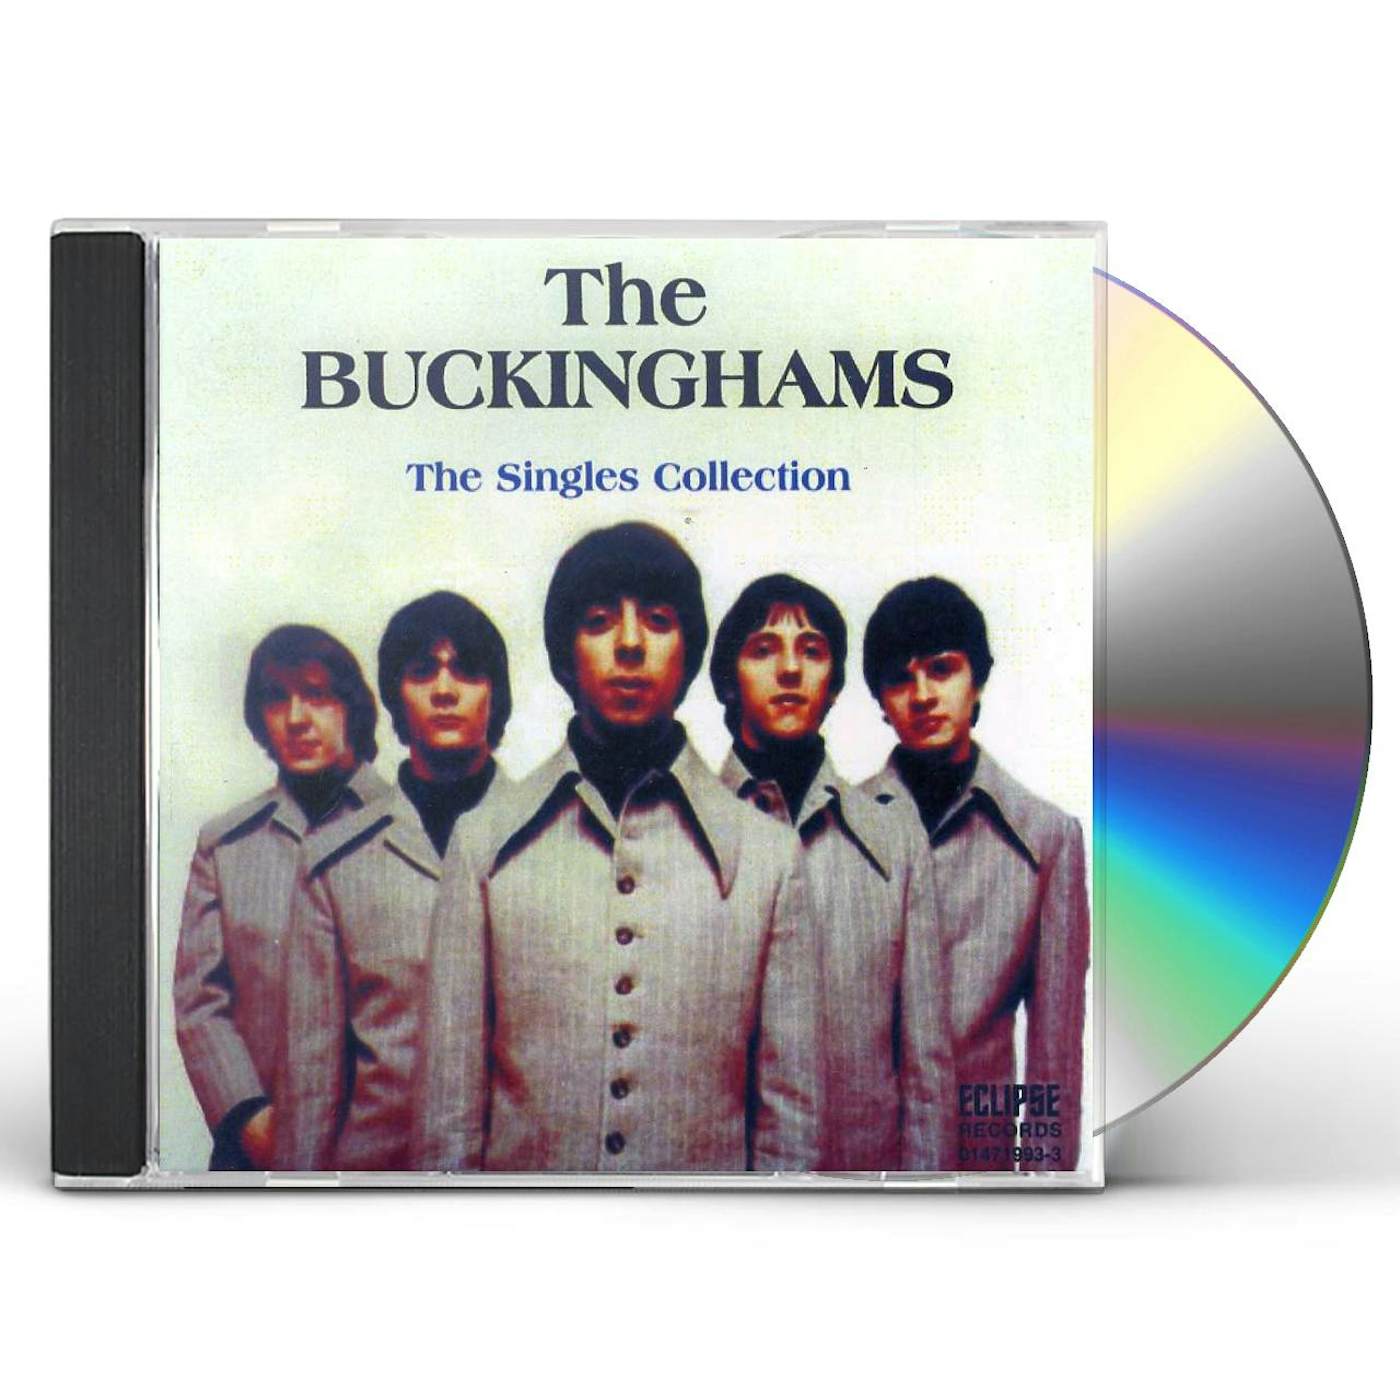 The Buckinghams SINGLES COLLECTION 31 CUTS CD